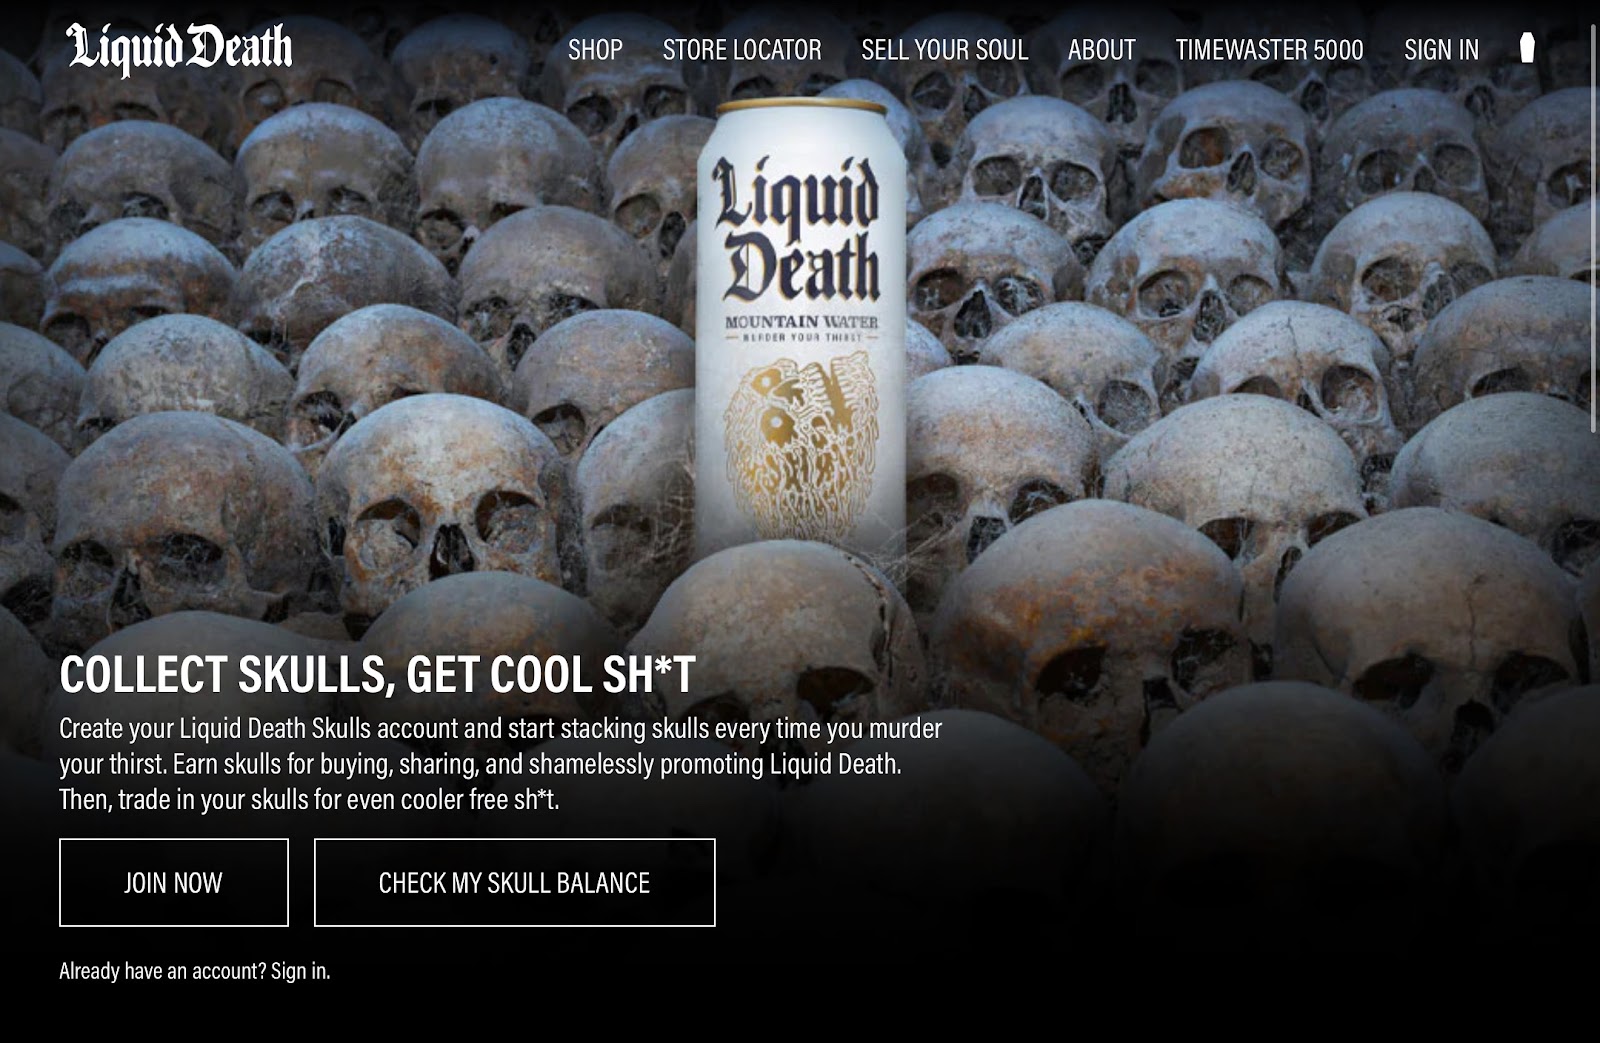 Rewards Program Holiday Checklist—A screenshot of Liquid Death’s loyalty program explainer page. The background is skulls with a can of Liquid Death water in the middle. The heading is “Collect Skulls, Get Cool Sh*t.”